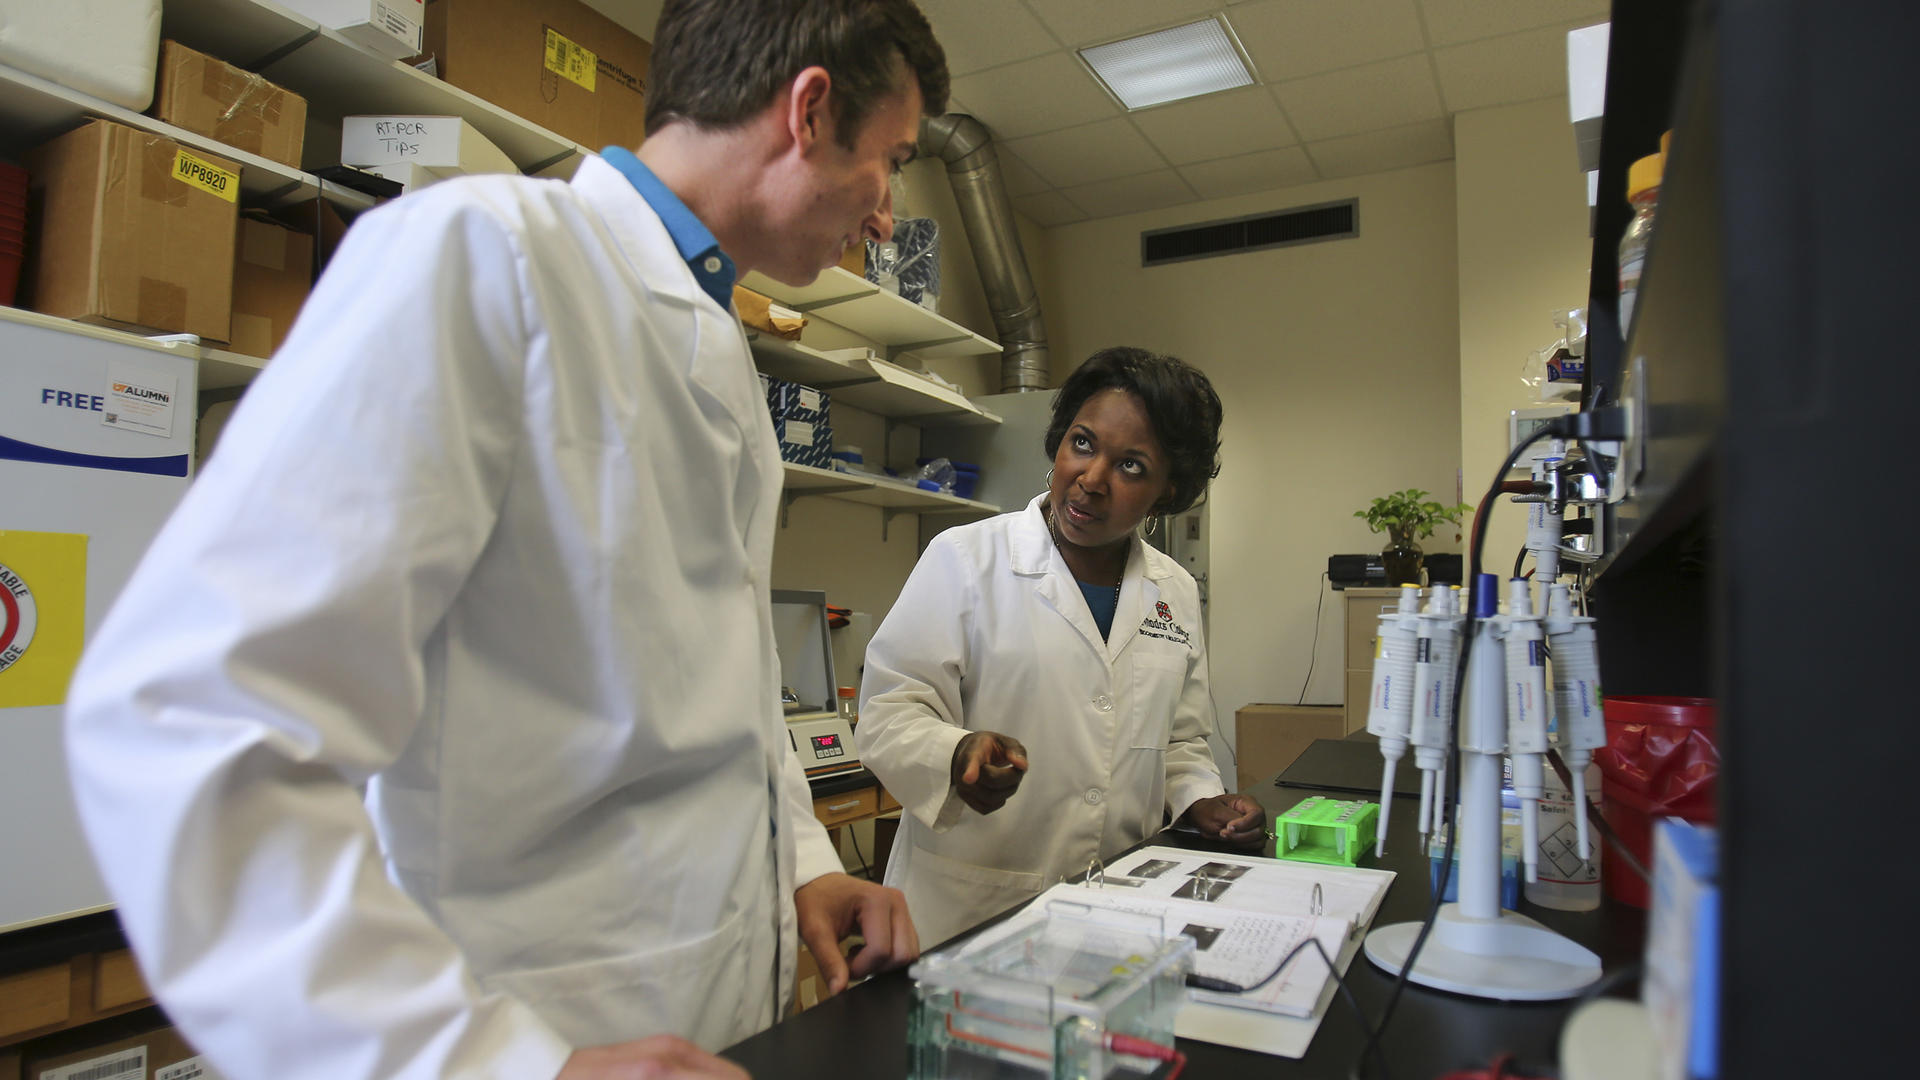 Two researchers in white coats stand at a lab table reviewing notes.